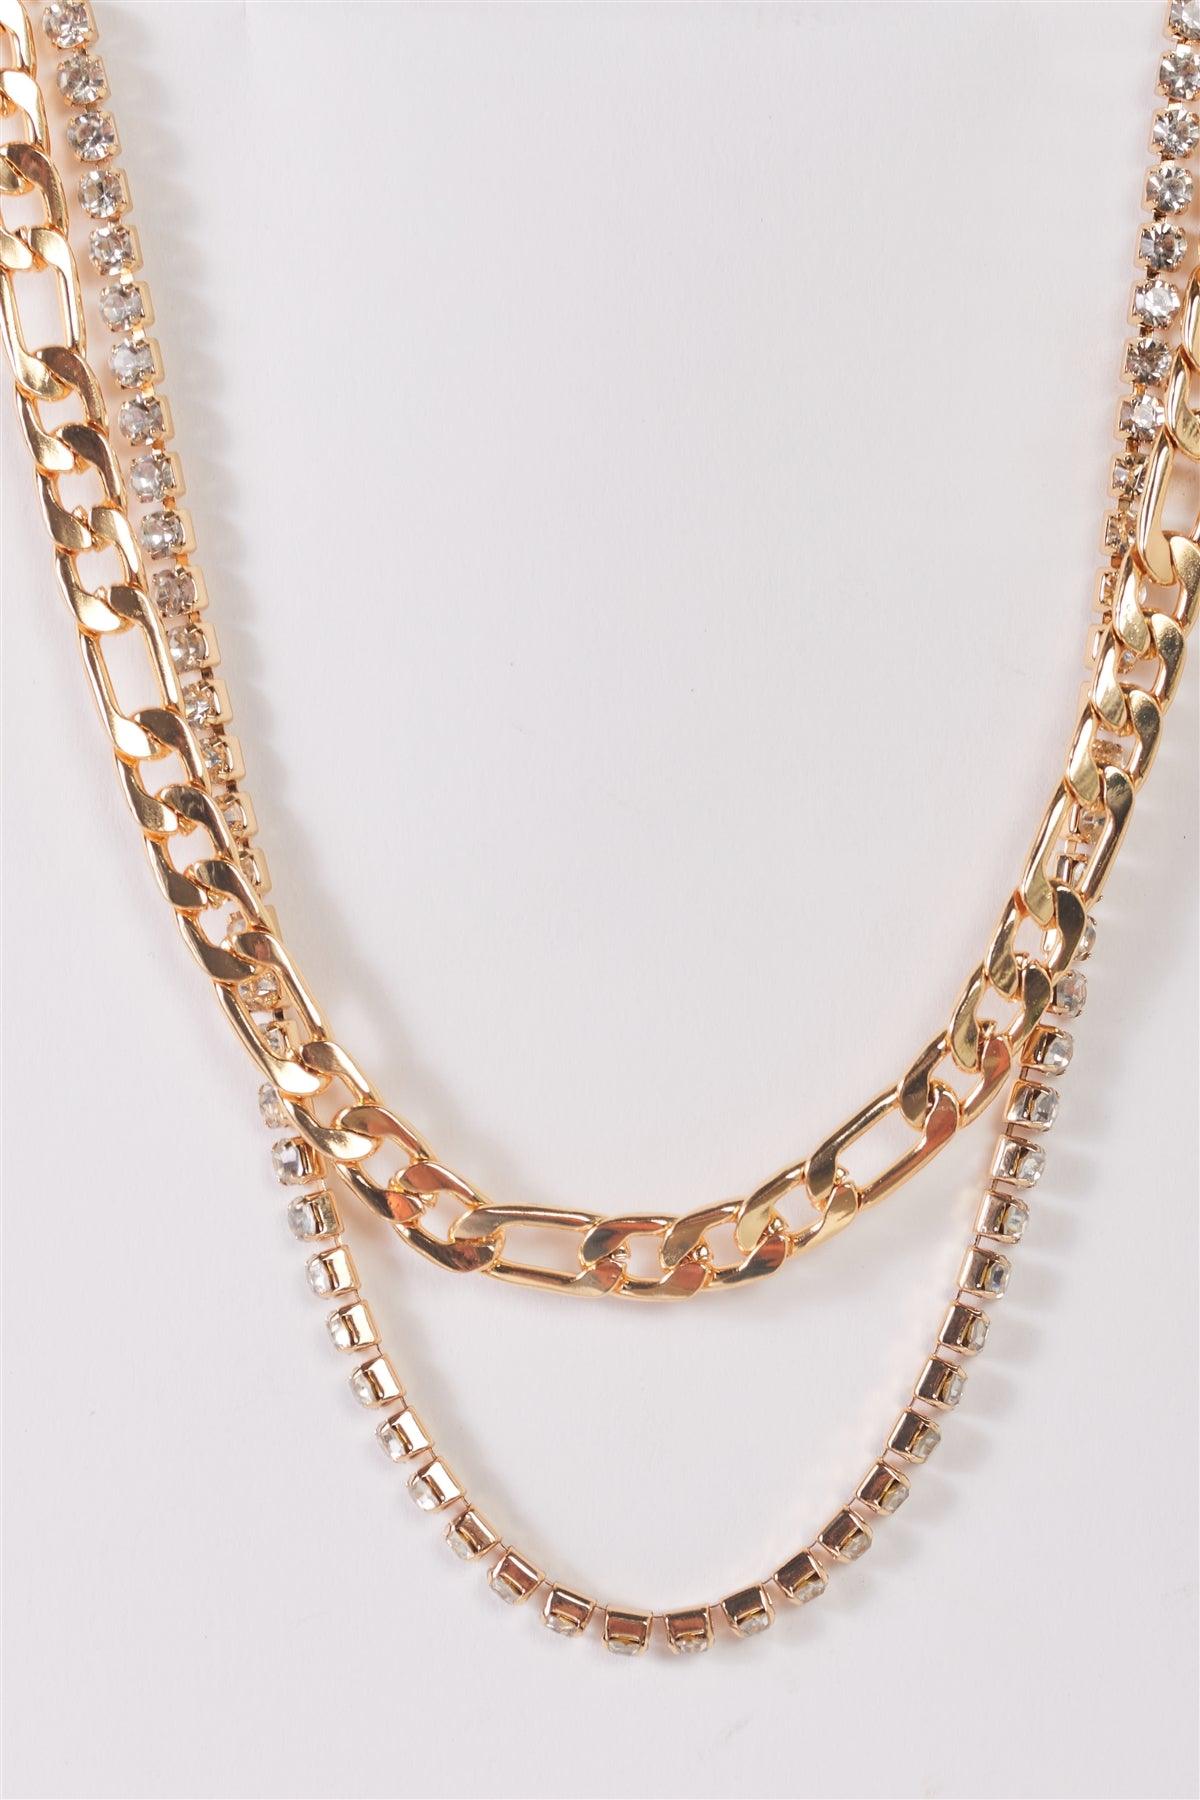 Gold Figaro Link Chain & Rhinestone Box Chain Set Necklace /3 Pieces